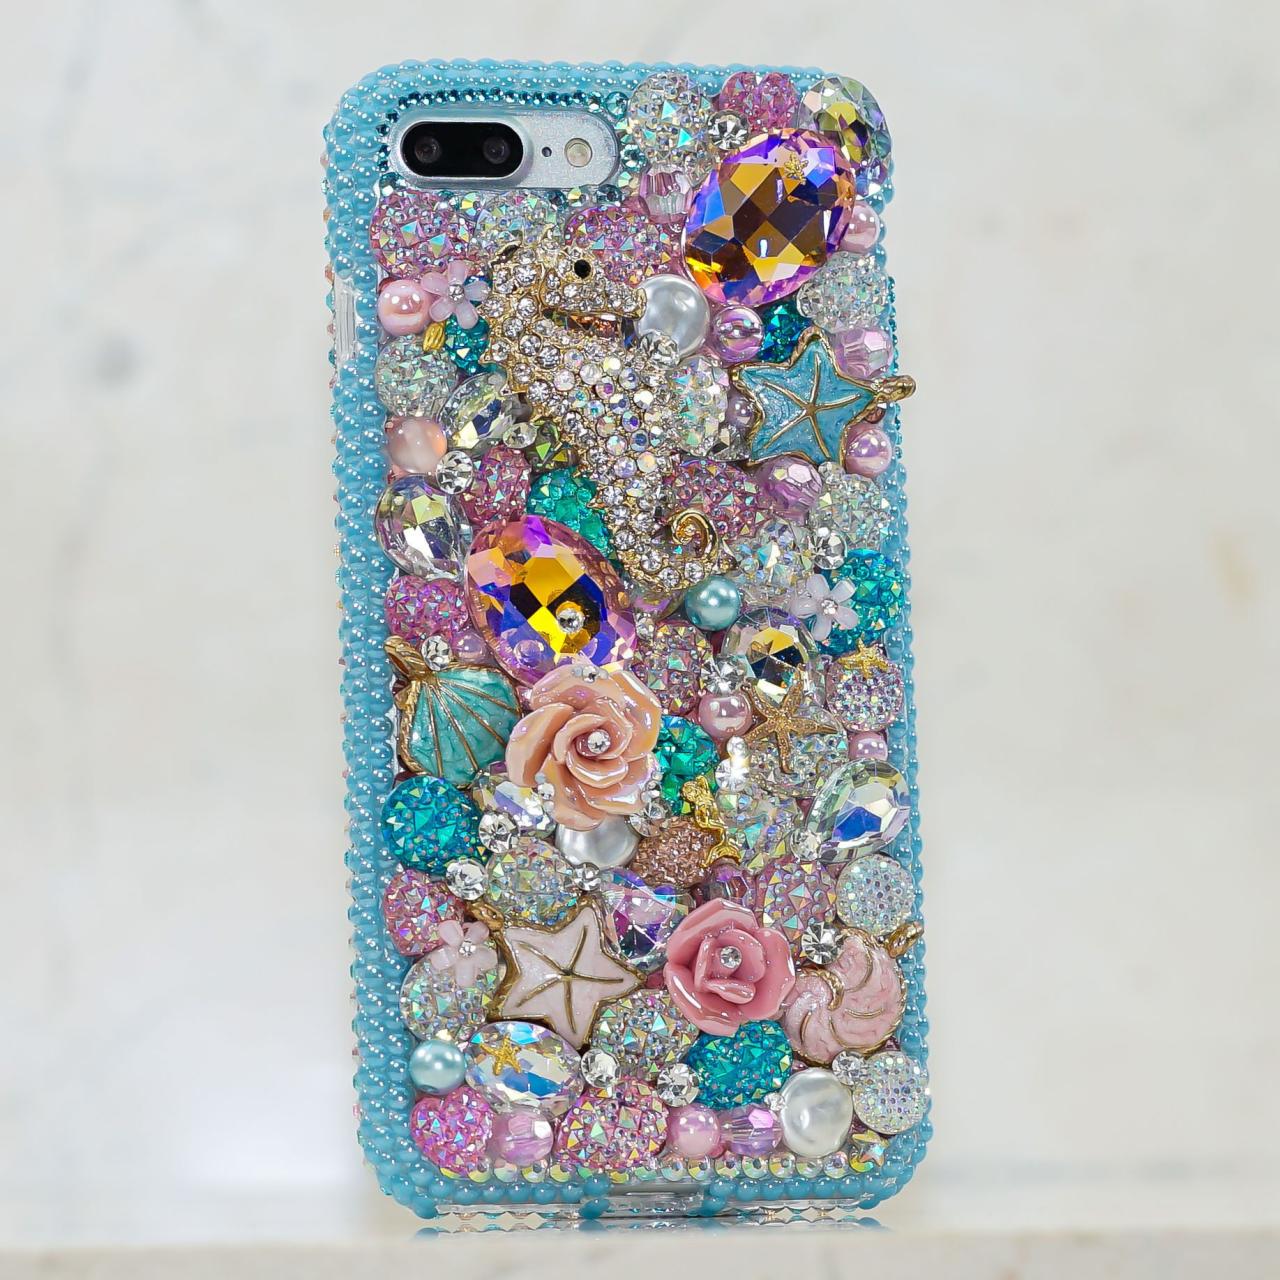 Bling Sea Horse Floral Rose Garden Blue Reef Genuine Crystals Diamond Sparkle Case For iPhone X XS Max XR 7 8 Plus Samsung Galaxy S9 Note 9